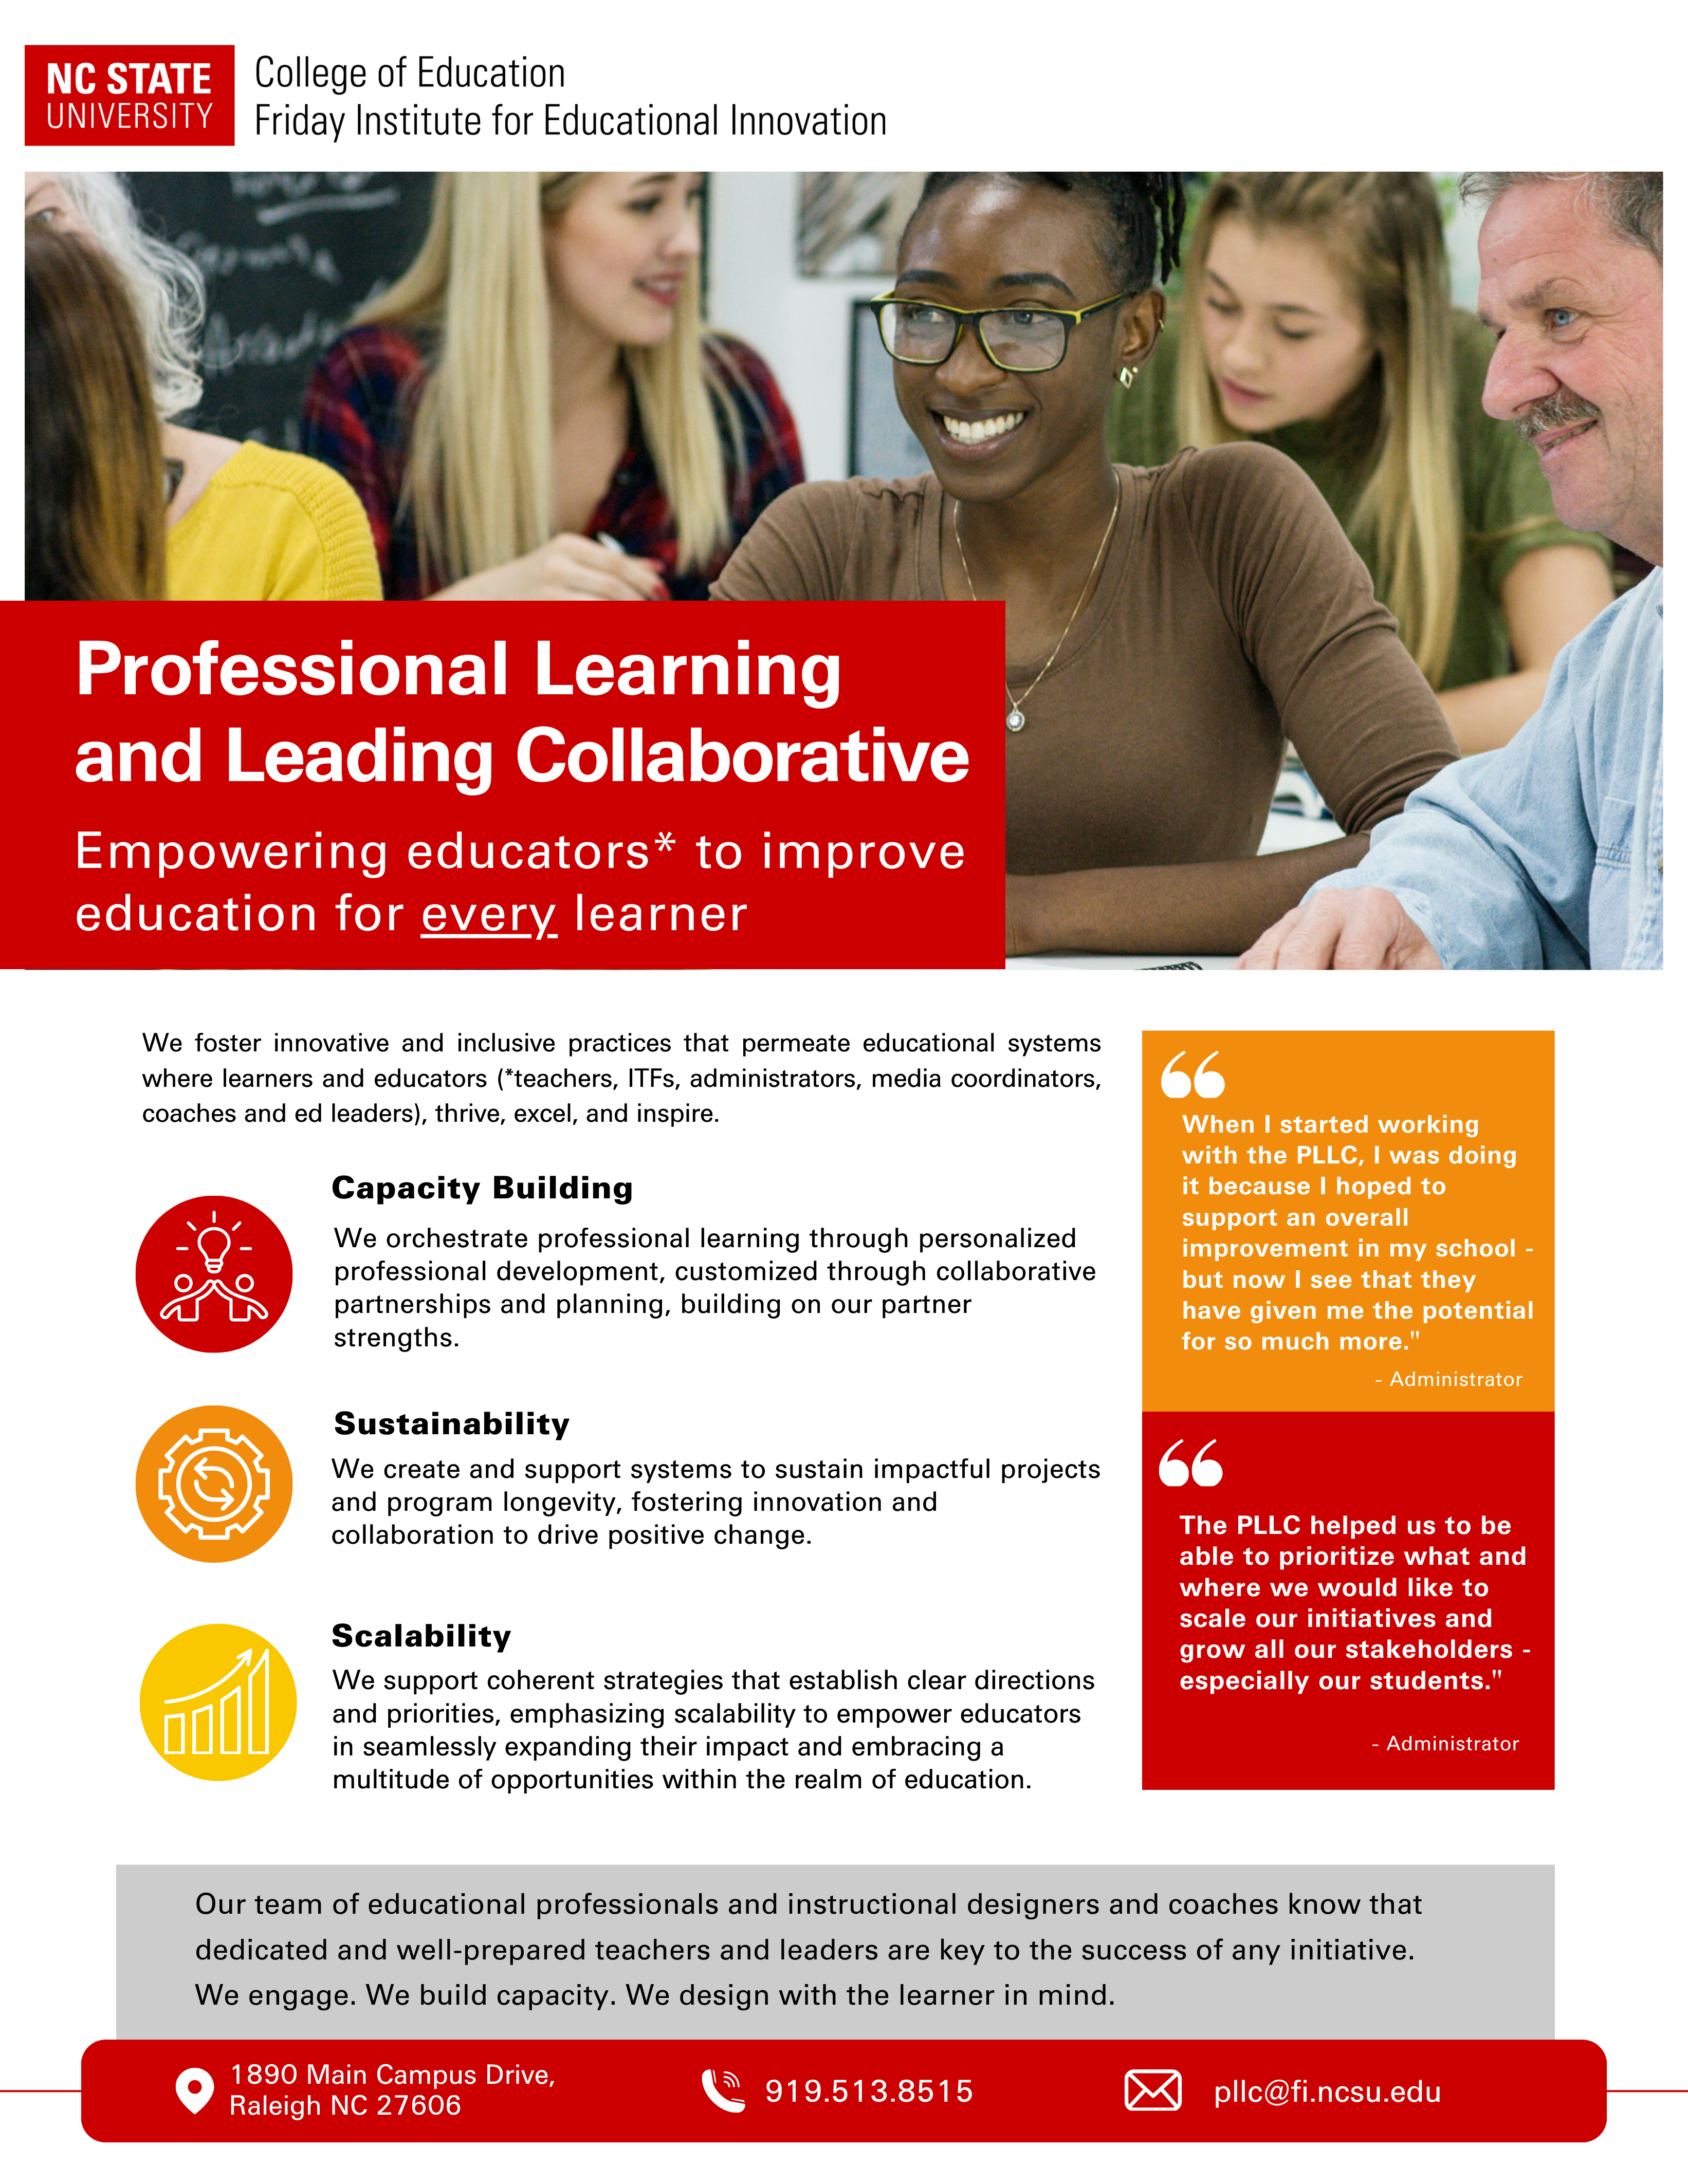 Graphic handout for the Professional Learning and Leading Collaborative and its core services: Capacity building, Sustainability and Scalability